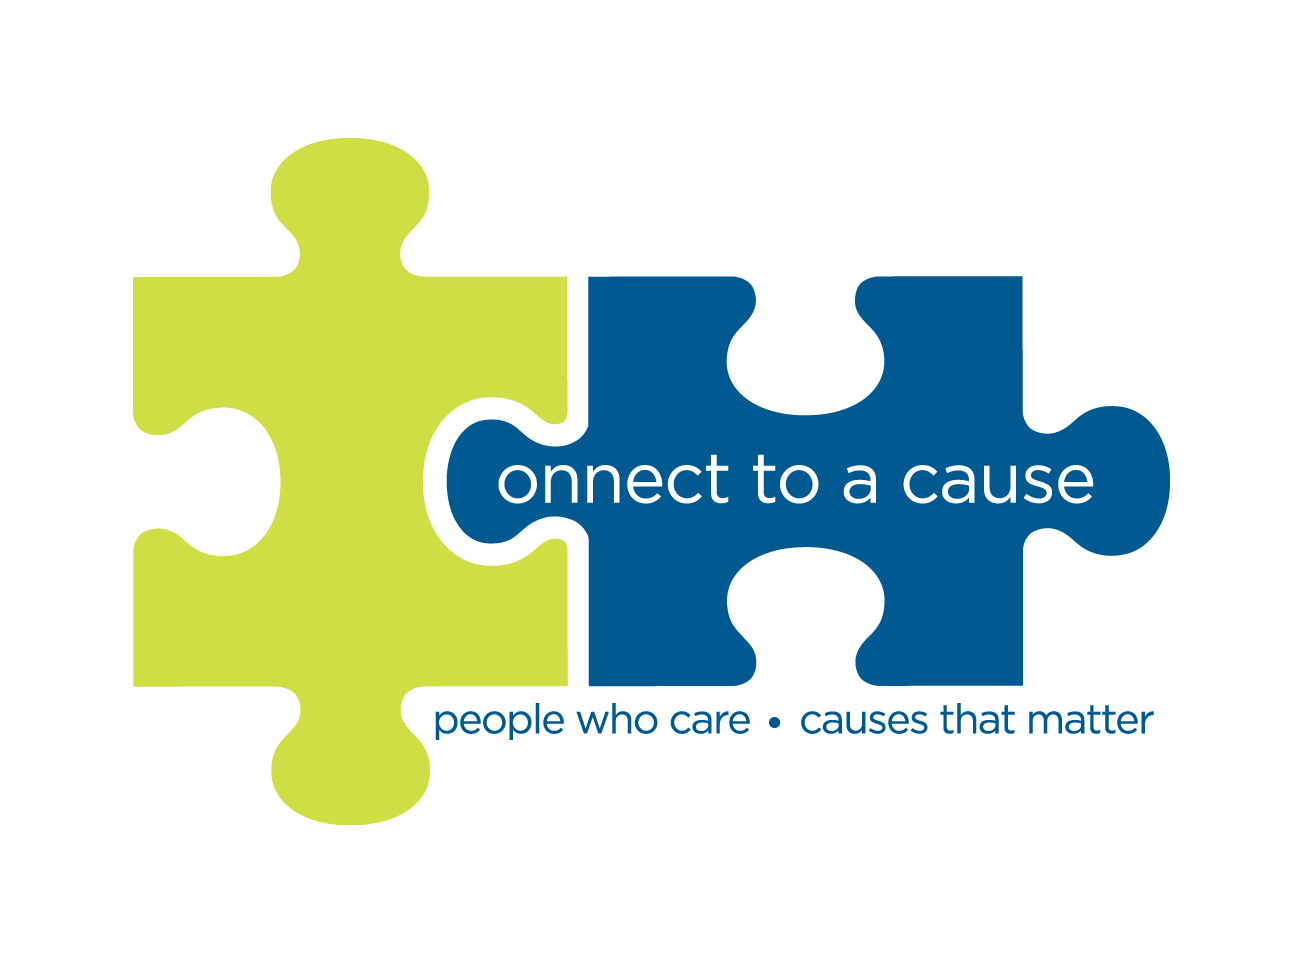 Connect to a cause